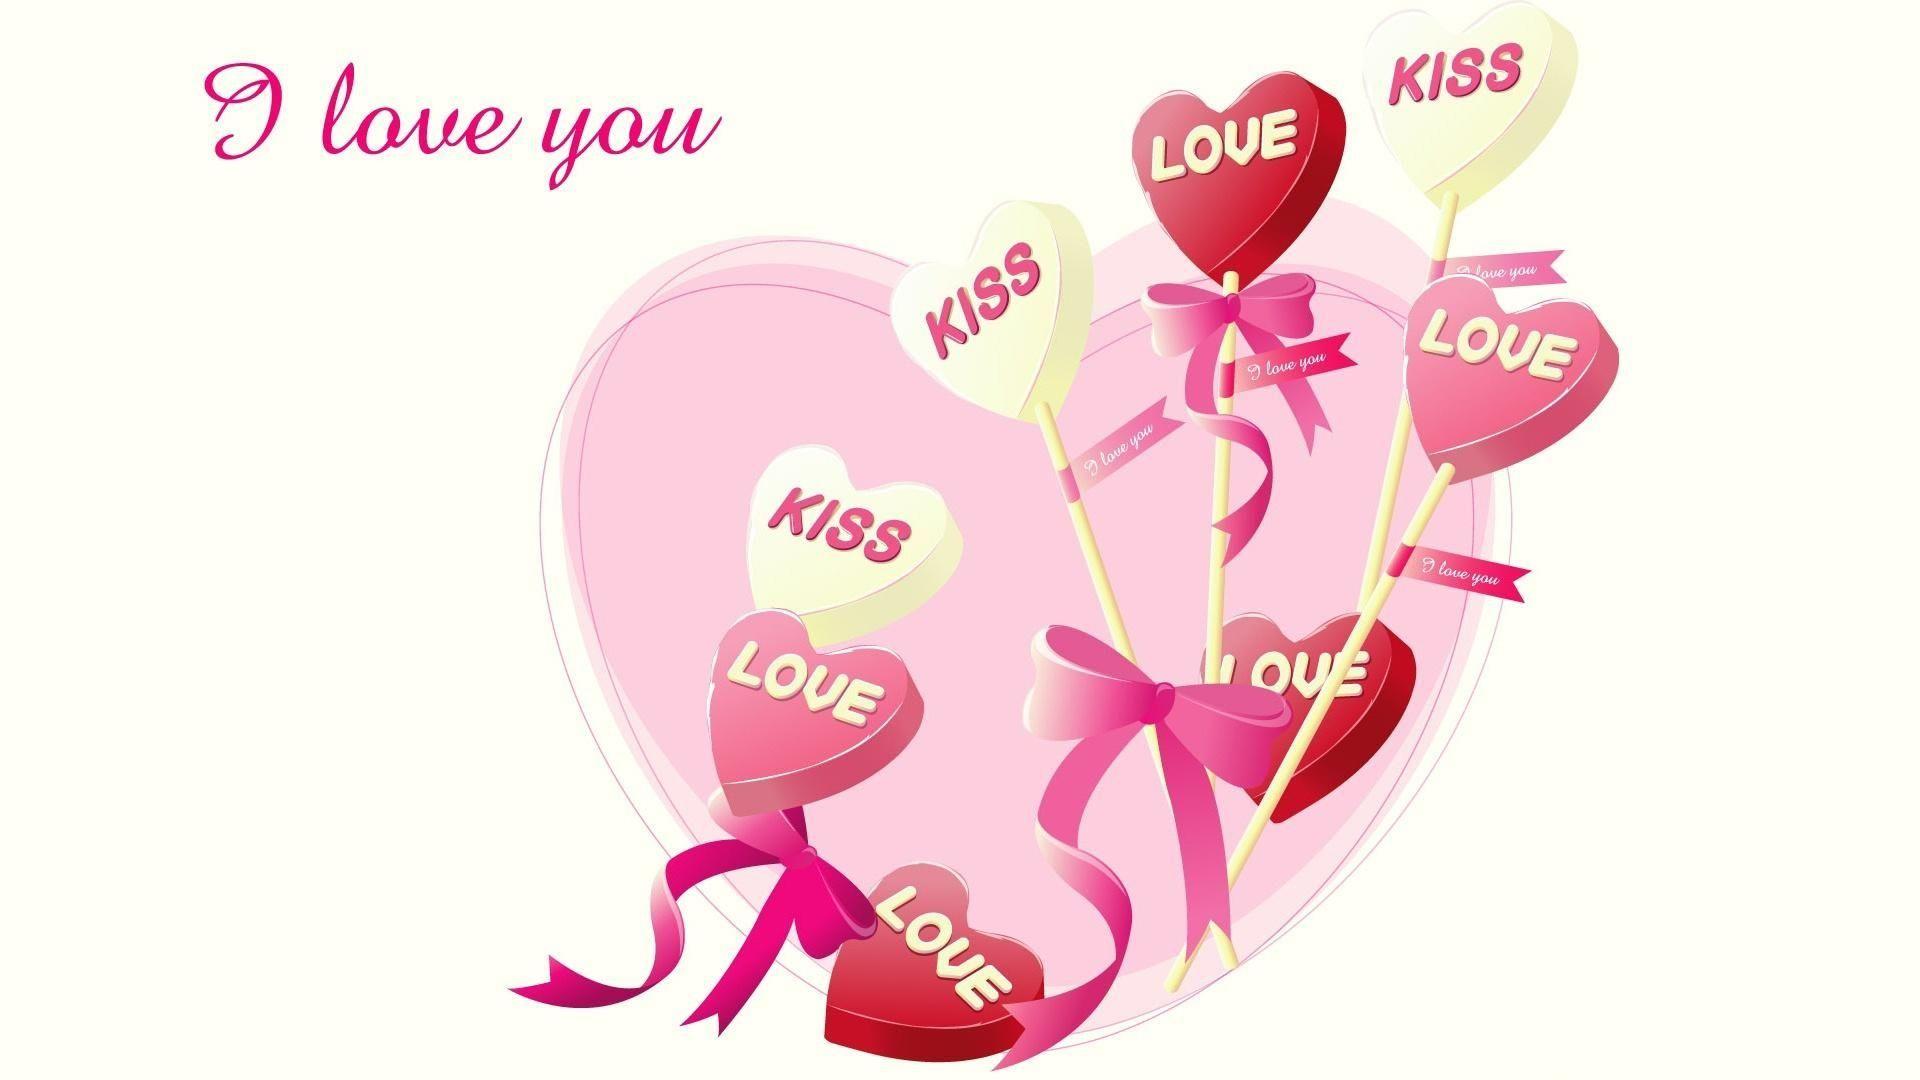 Free image of love you heart Download Love You Heart Wallpaper